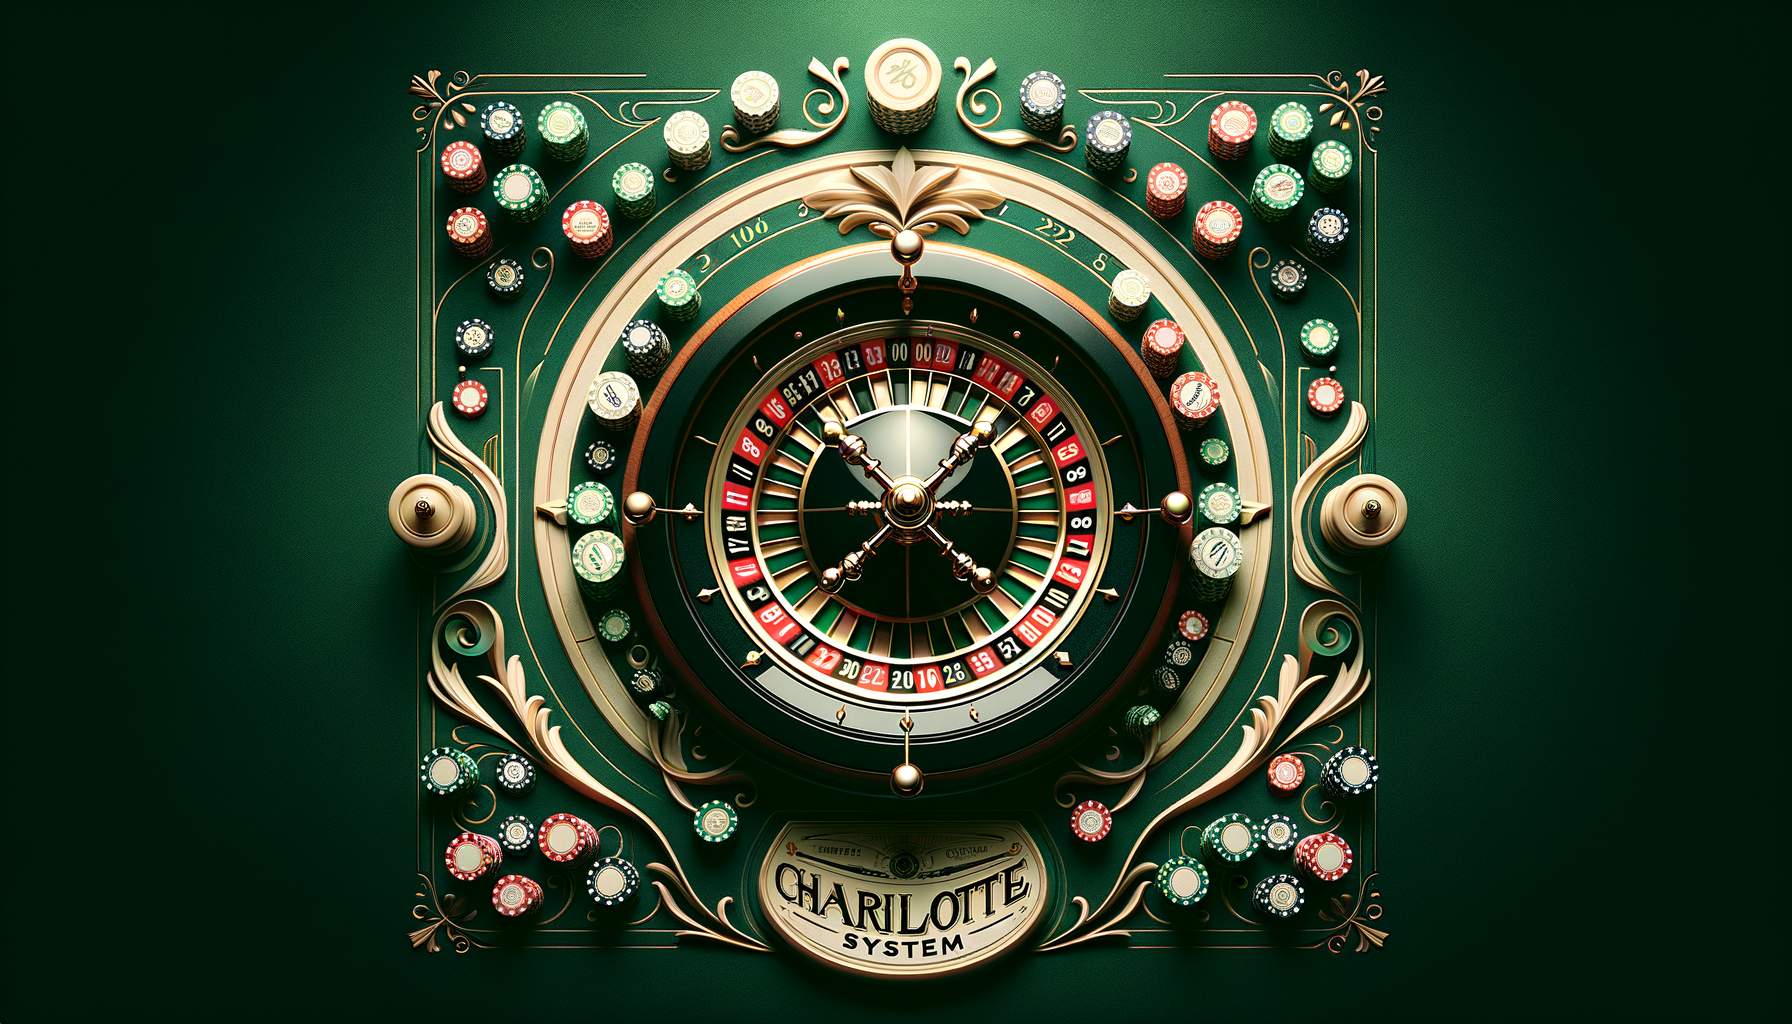 Charlotte System: Unveiling Roulette Strategies